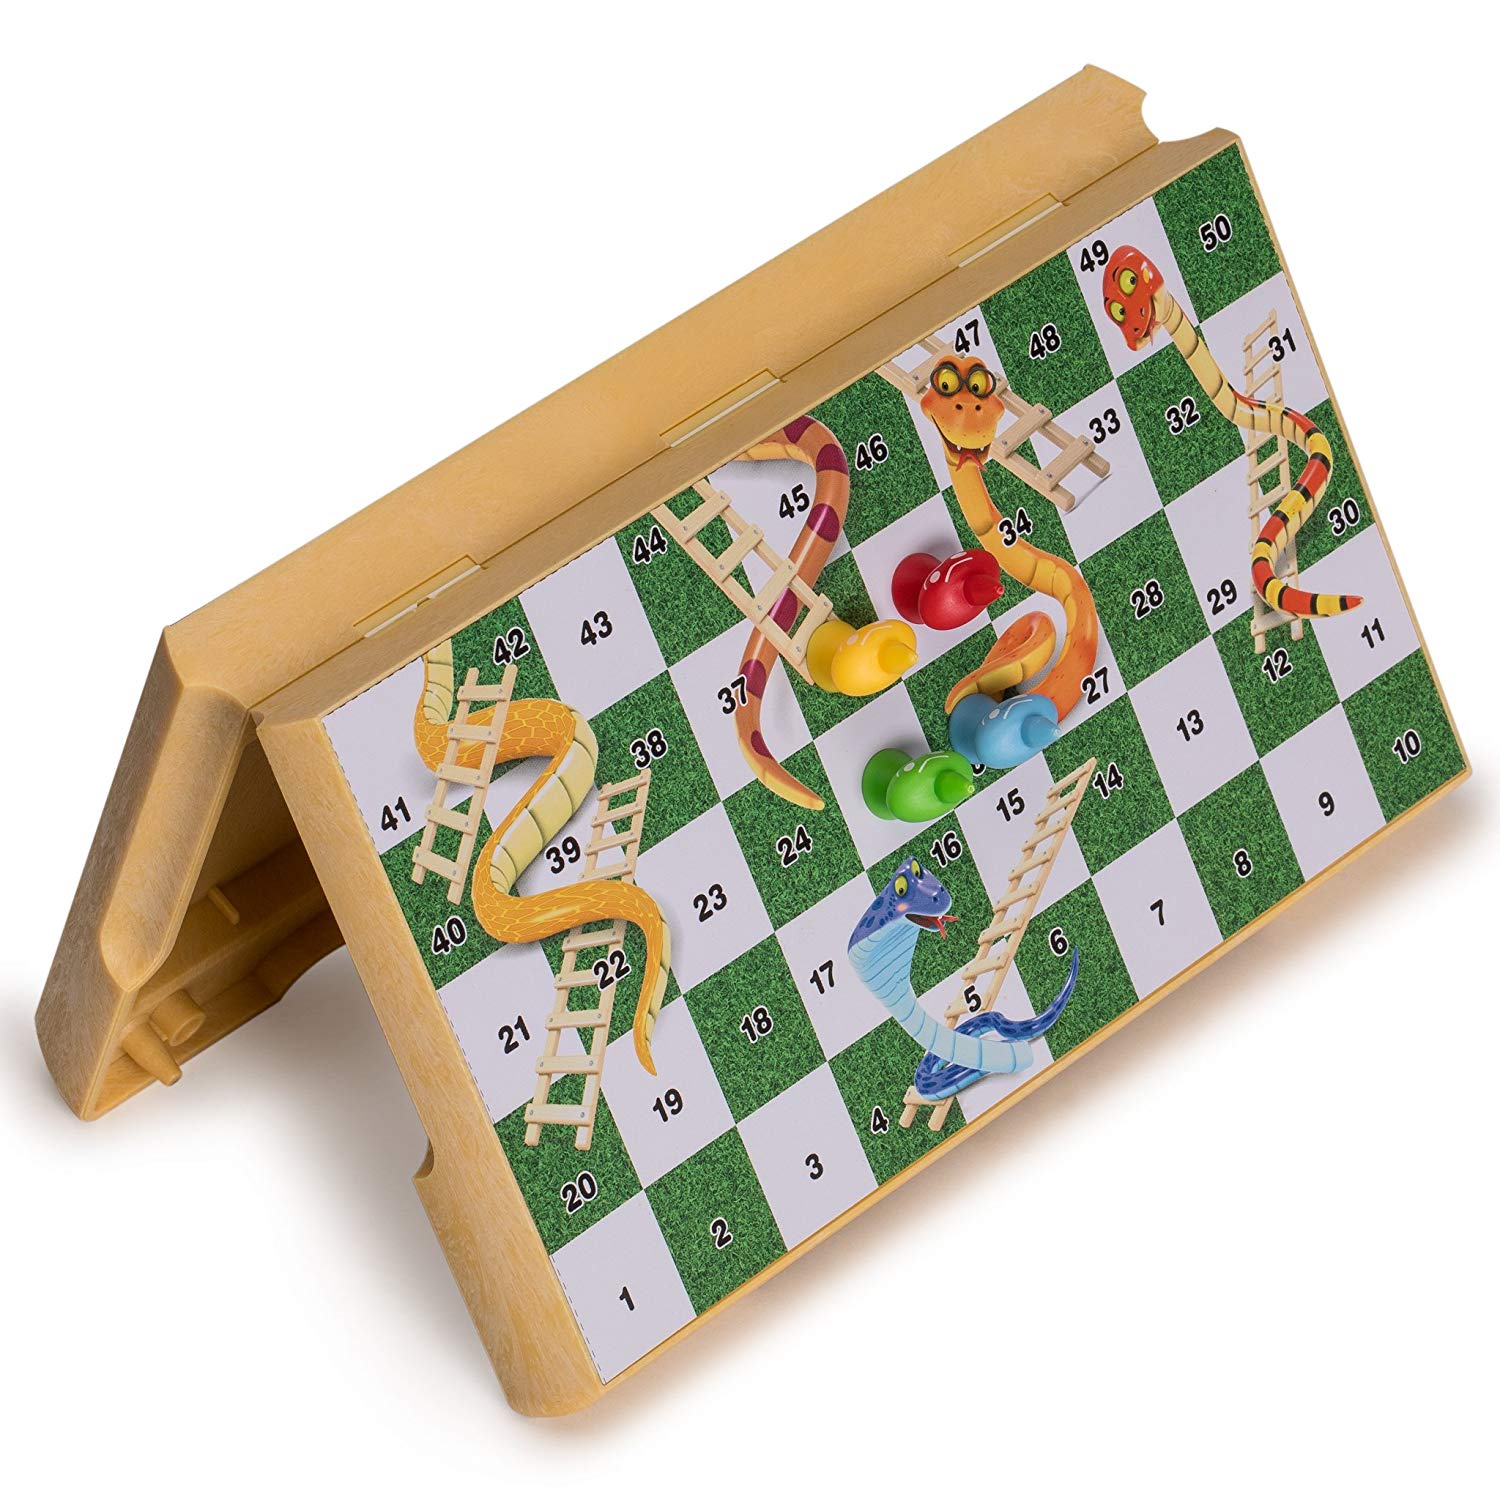 Snakes And Ladders Box